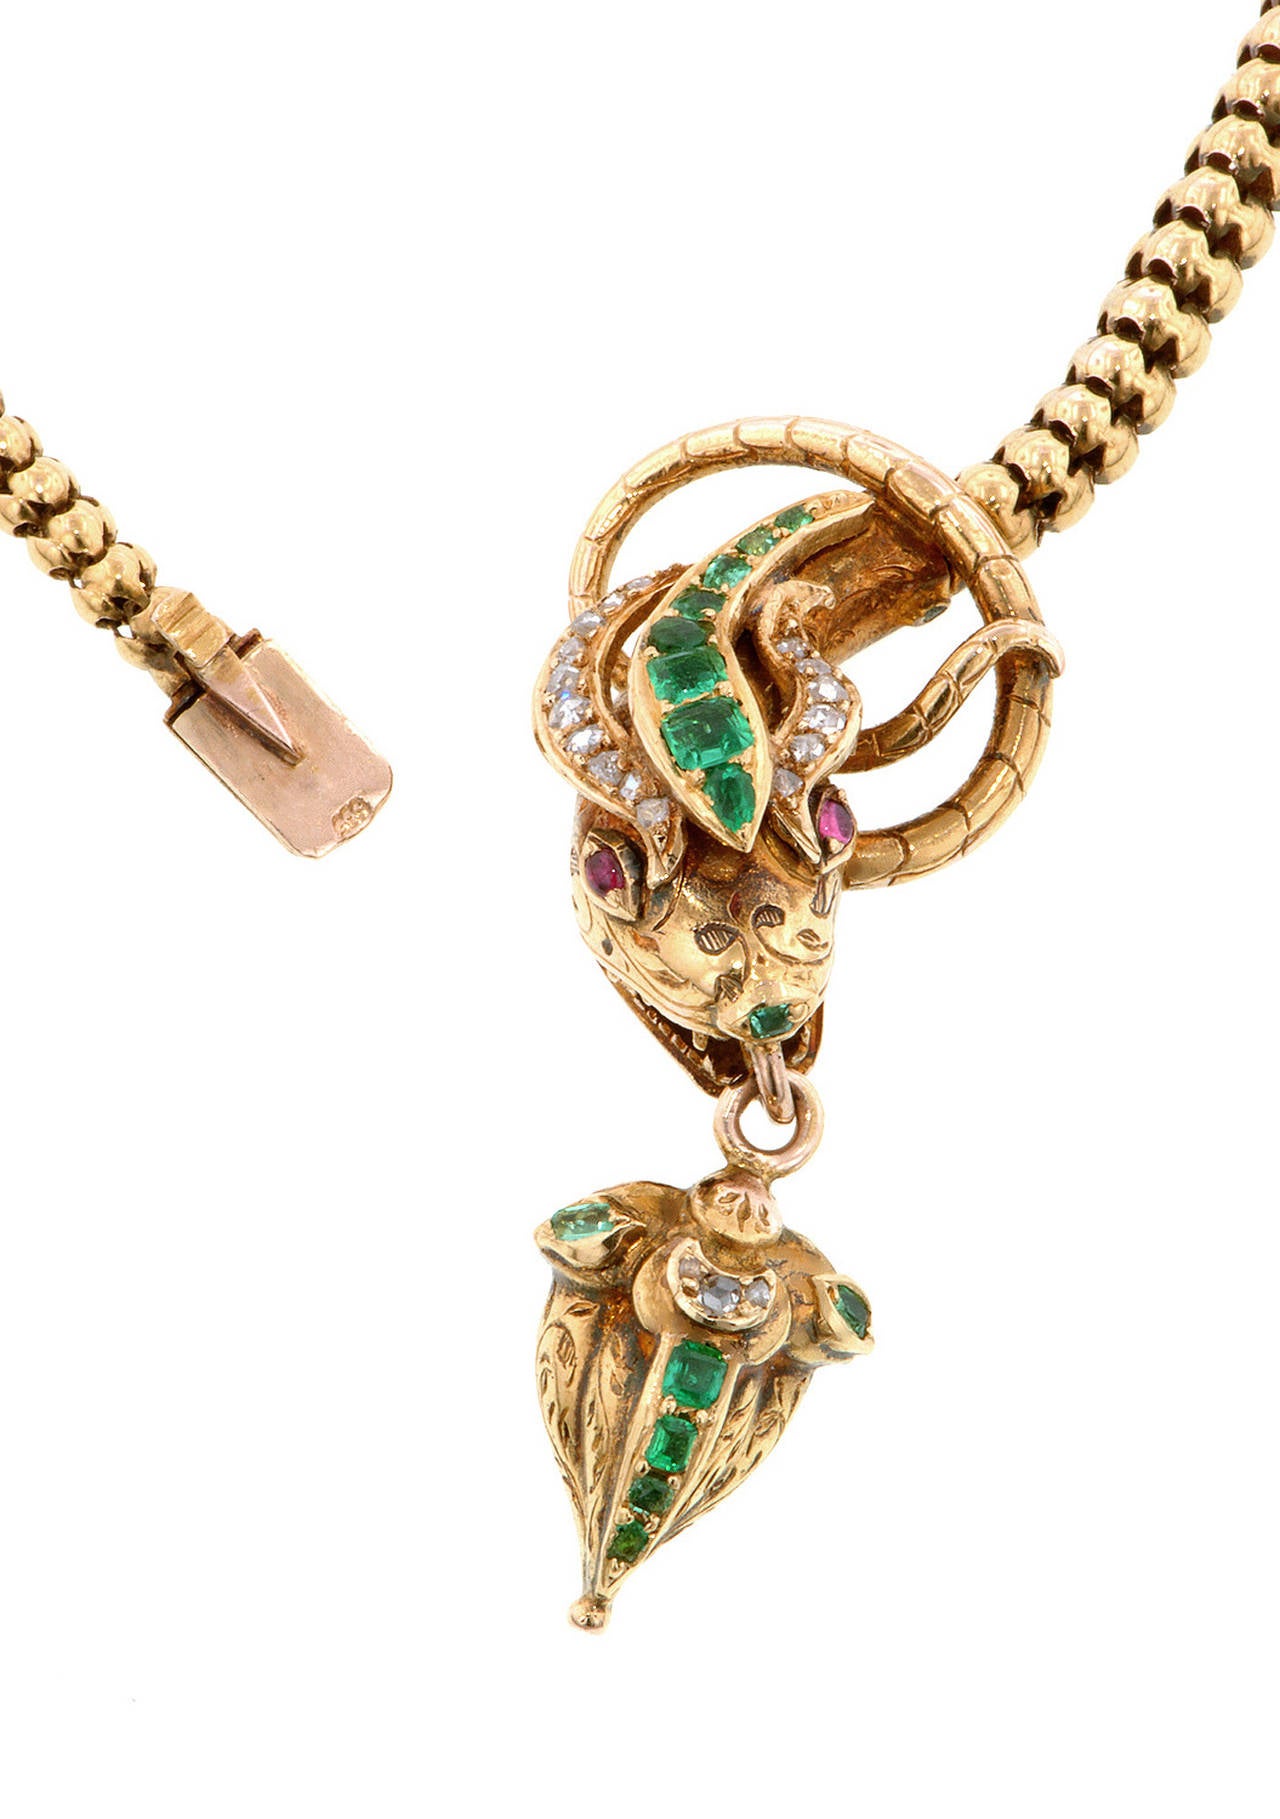 Victorian emerald & diamond snake necklace with locket-back drop measuring app. 1 3/4 x 3/4 inch wide, set with emerald, round and pear cut emeralds measuring app 1.0 - 2.5mm, Rose cut diamonds (1.0 - 1.5mm) and ruby eyes (1.5mm), fashioned in 14k.